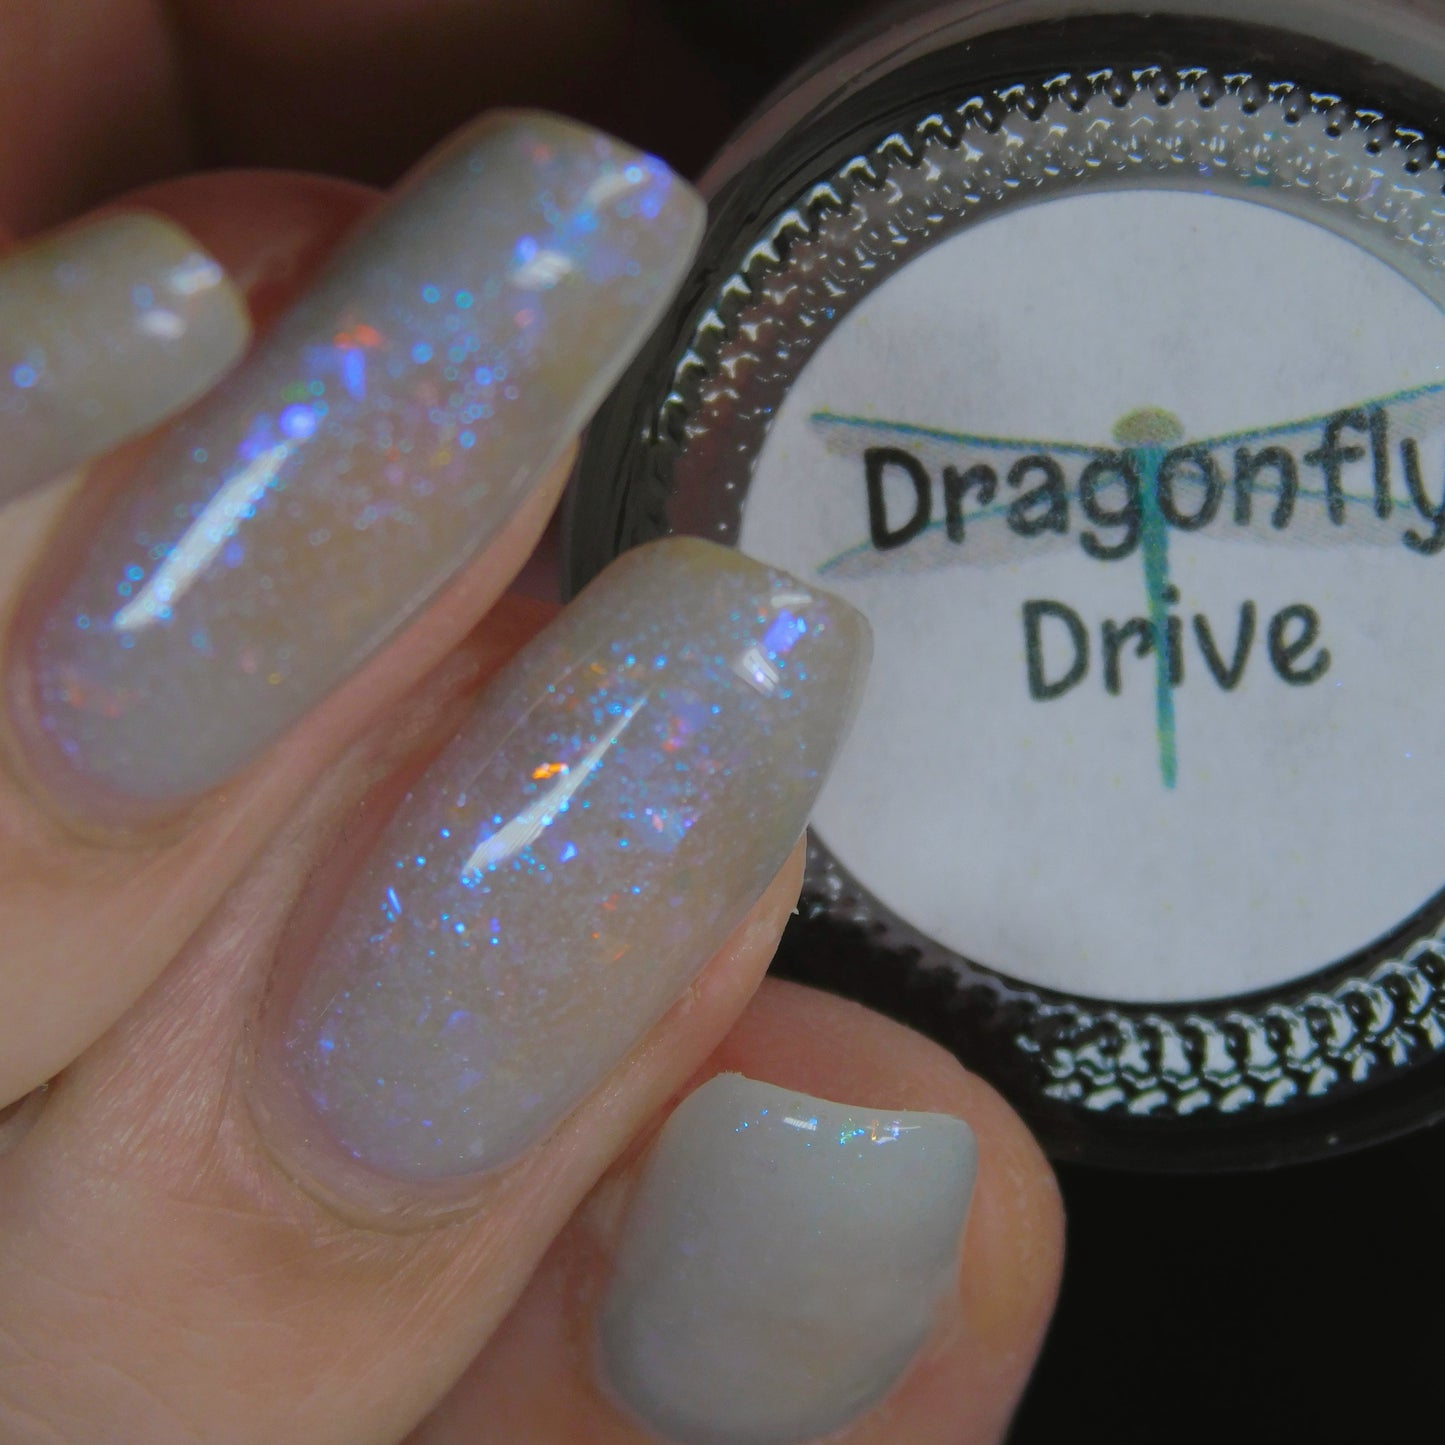 Dragonfly Drive